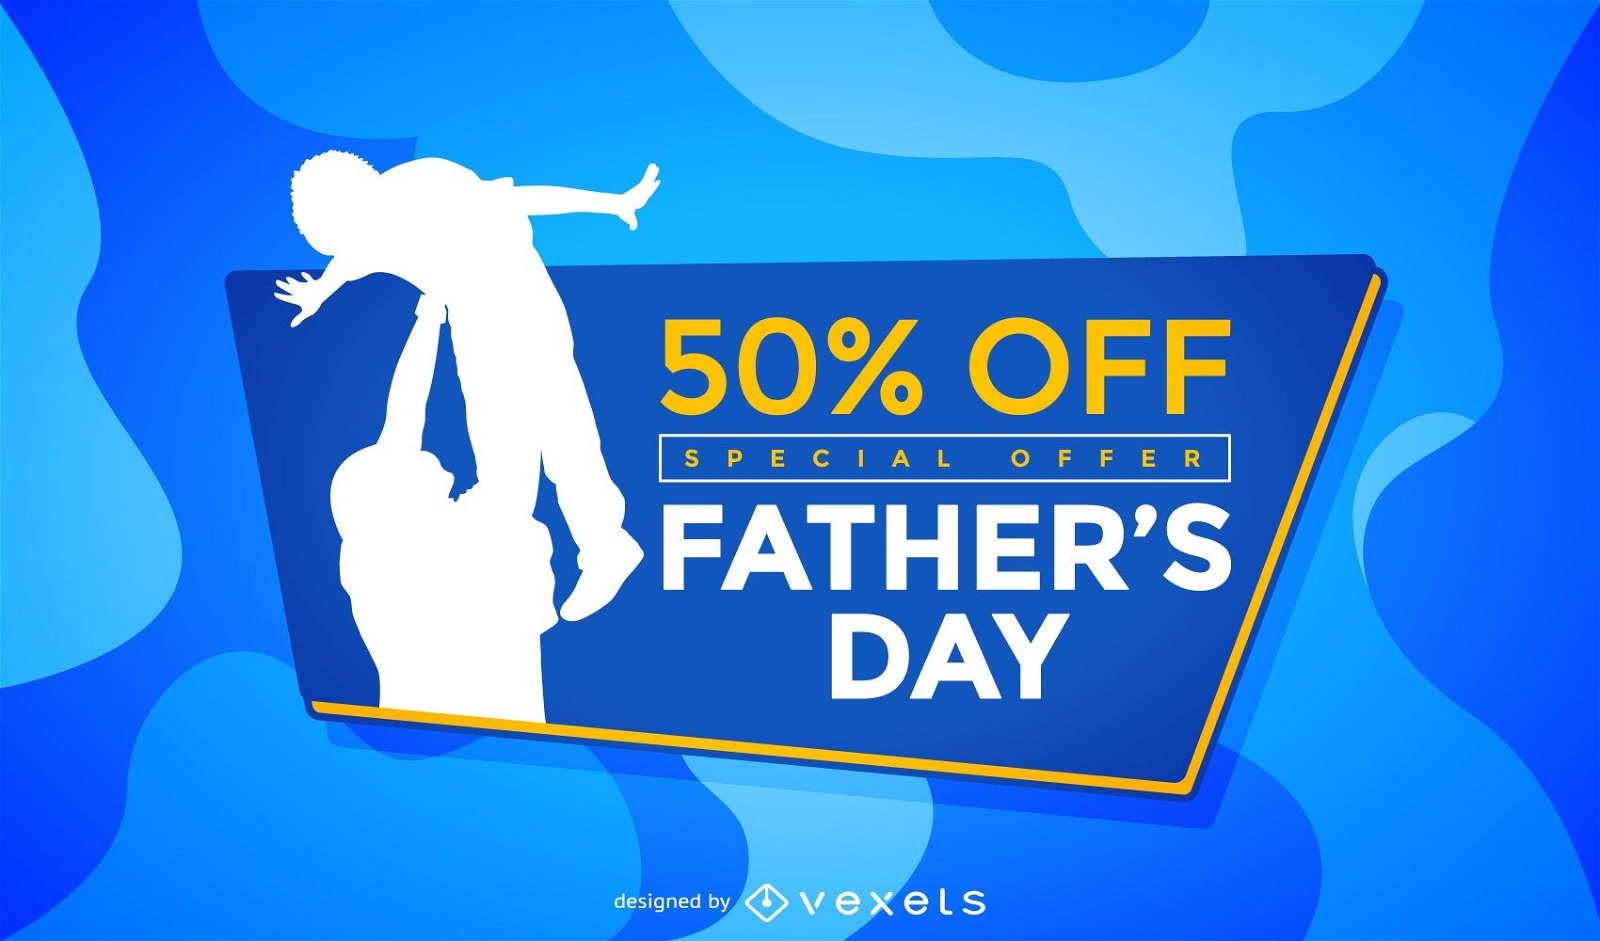 Father's Day sale promo